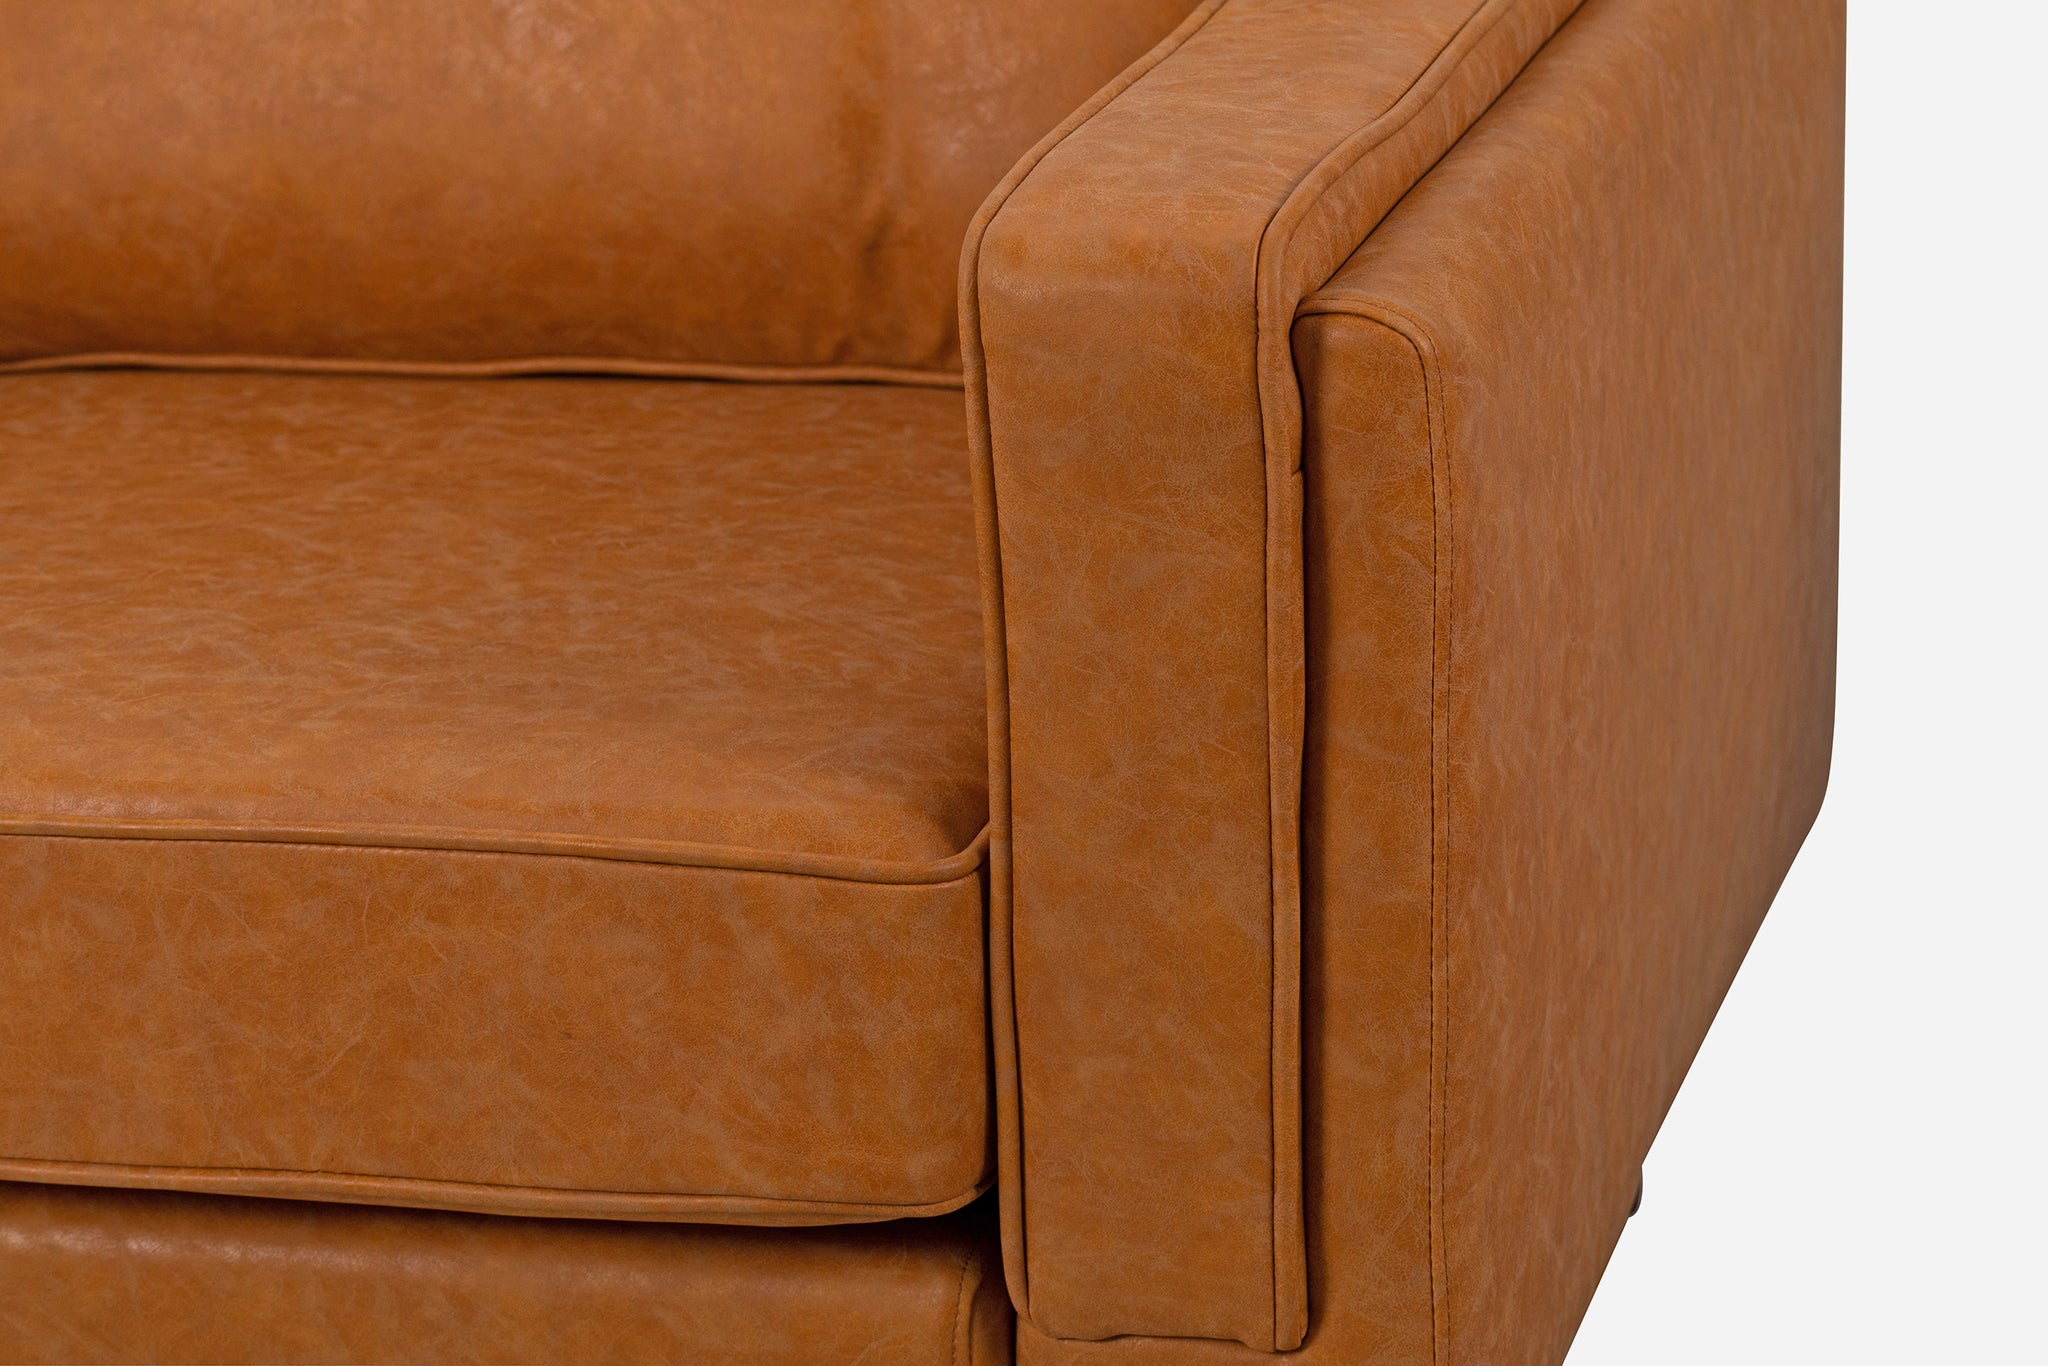 albany sofa shown in distressed vegan leather with walnut legs